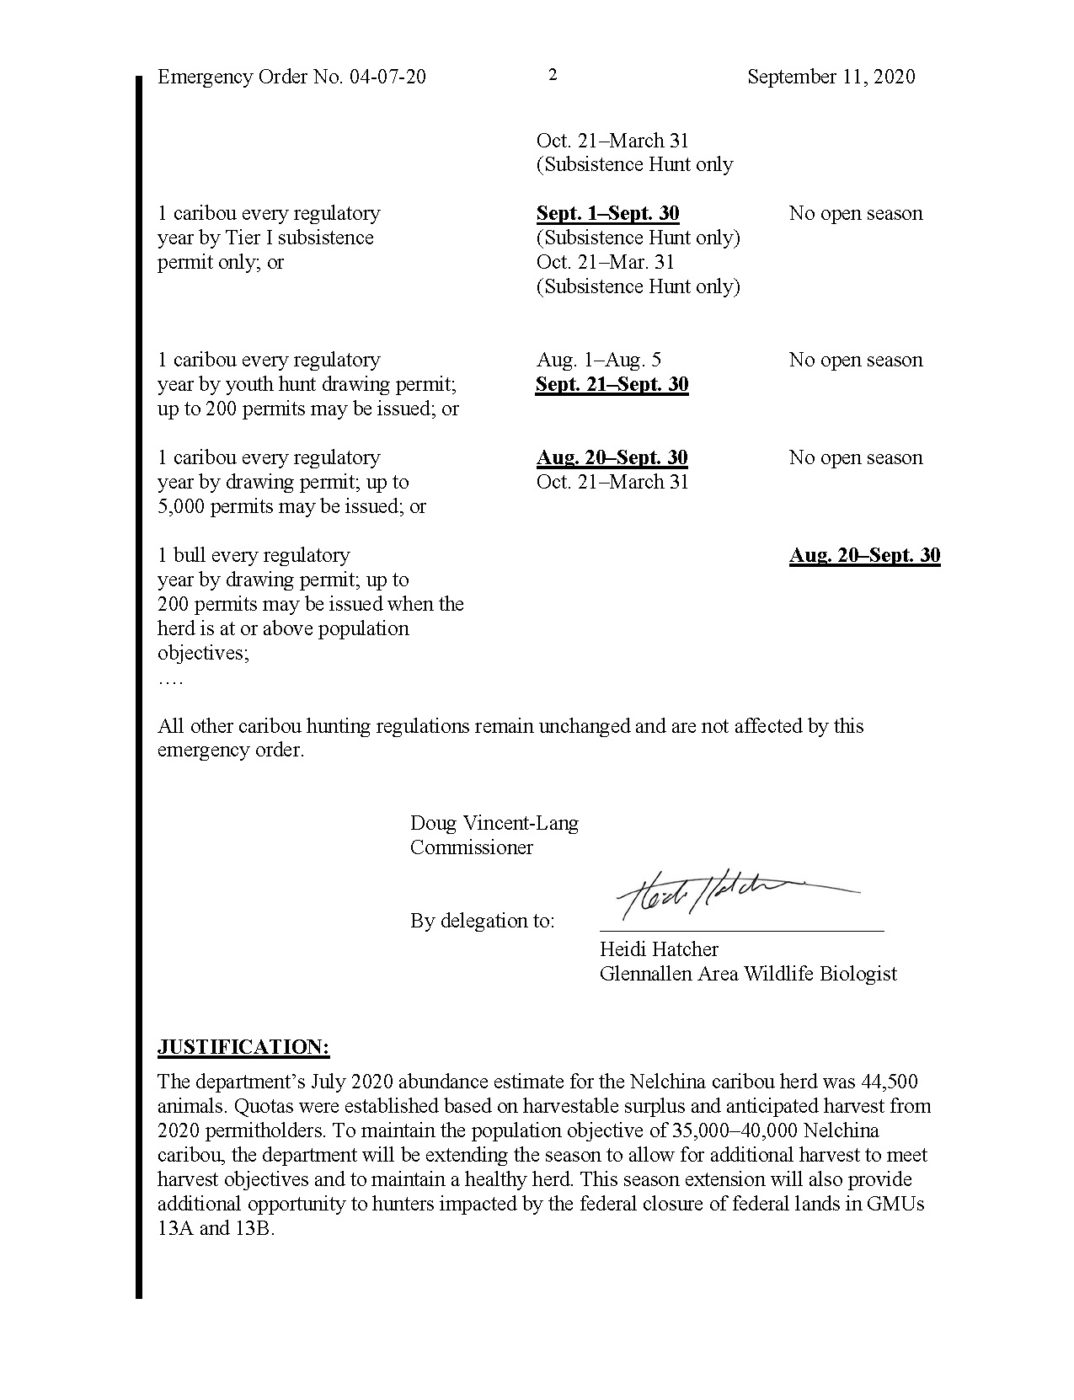 Hunting and Trapping Emergency Order Page 2